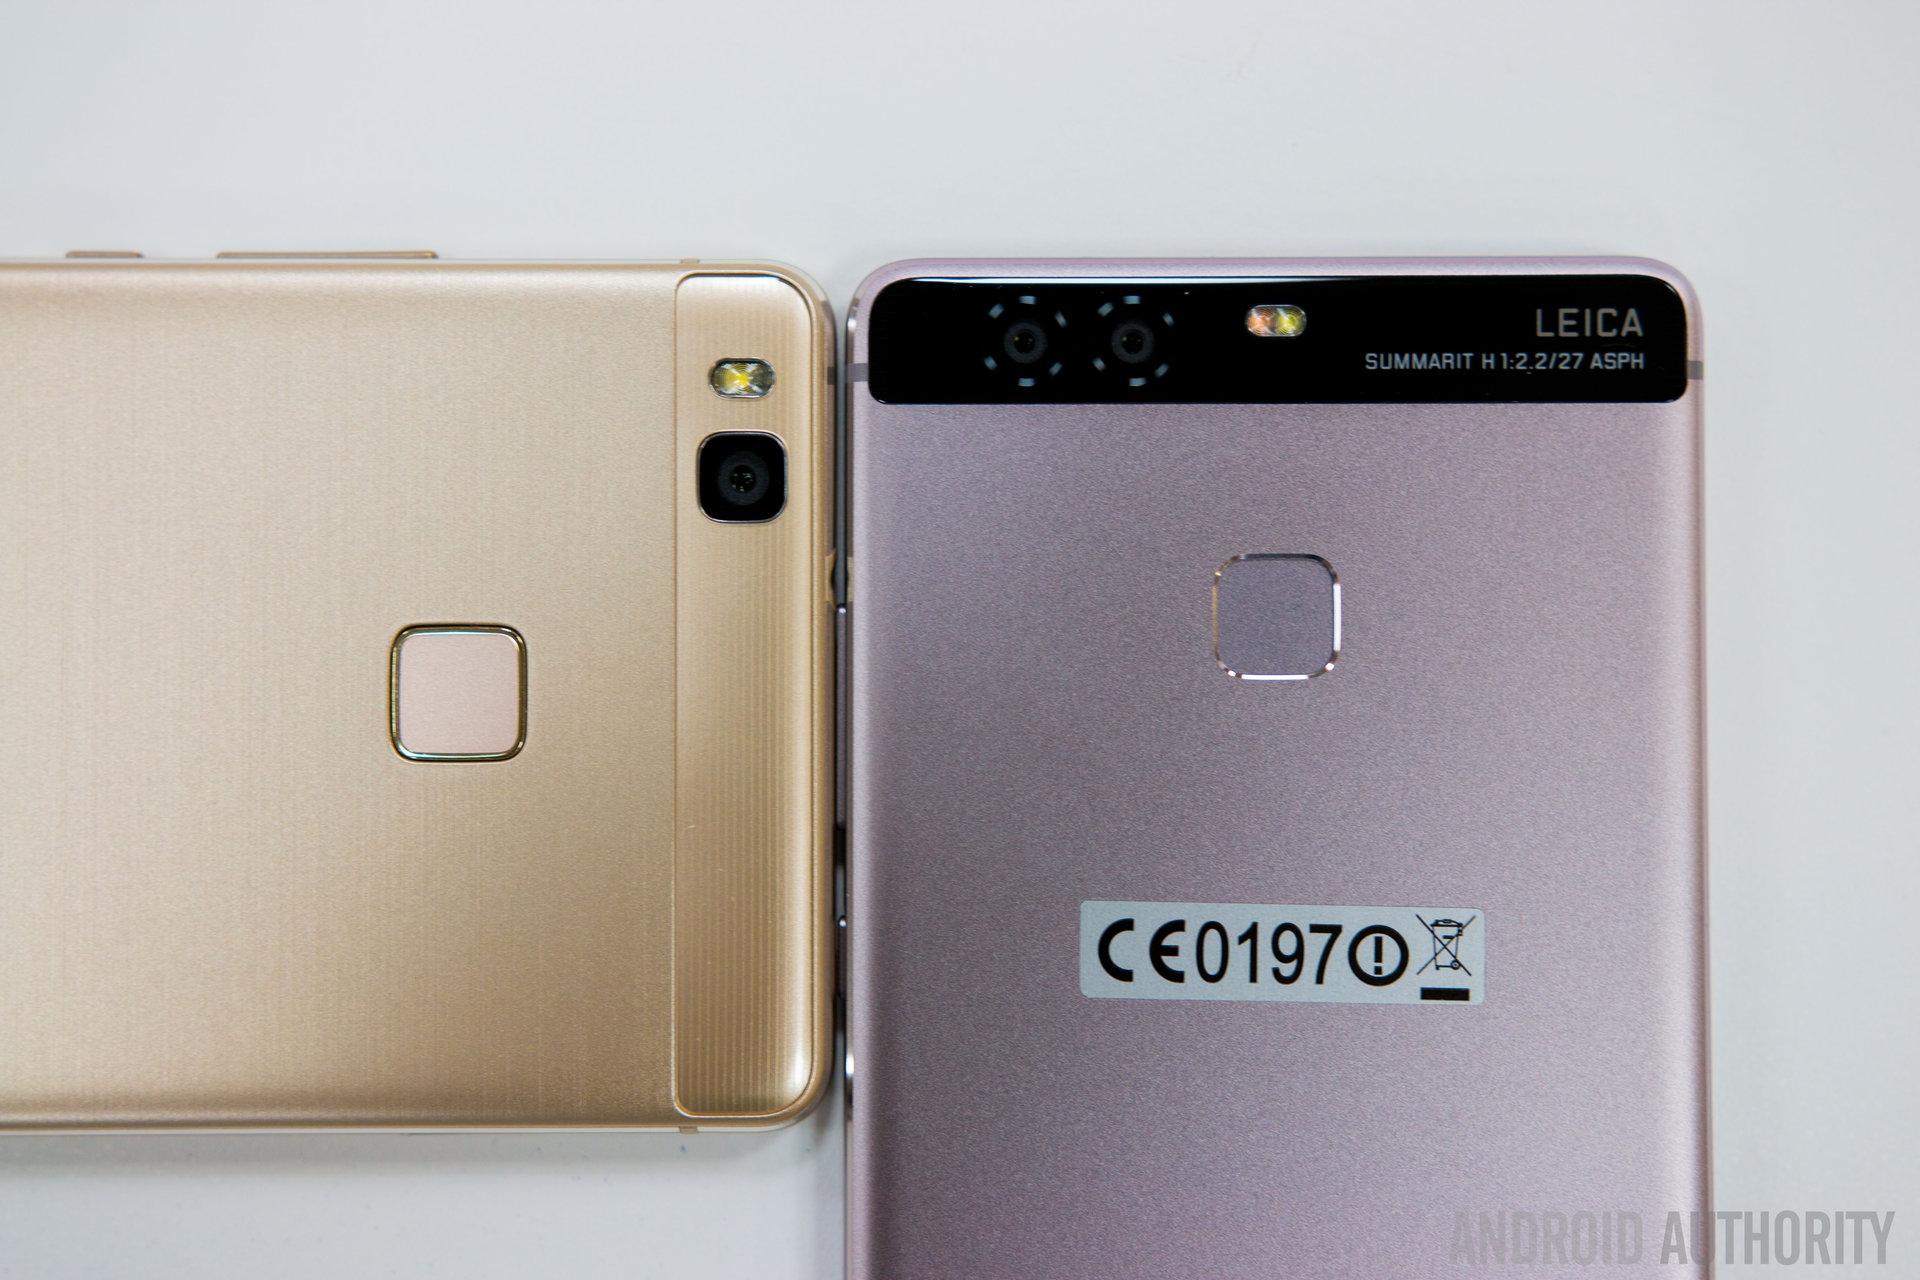 Gøre en indsats farligt farvestof HUAWEI P9 Lite vs HUAWEI P9 quick look - Android Authority